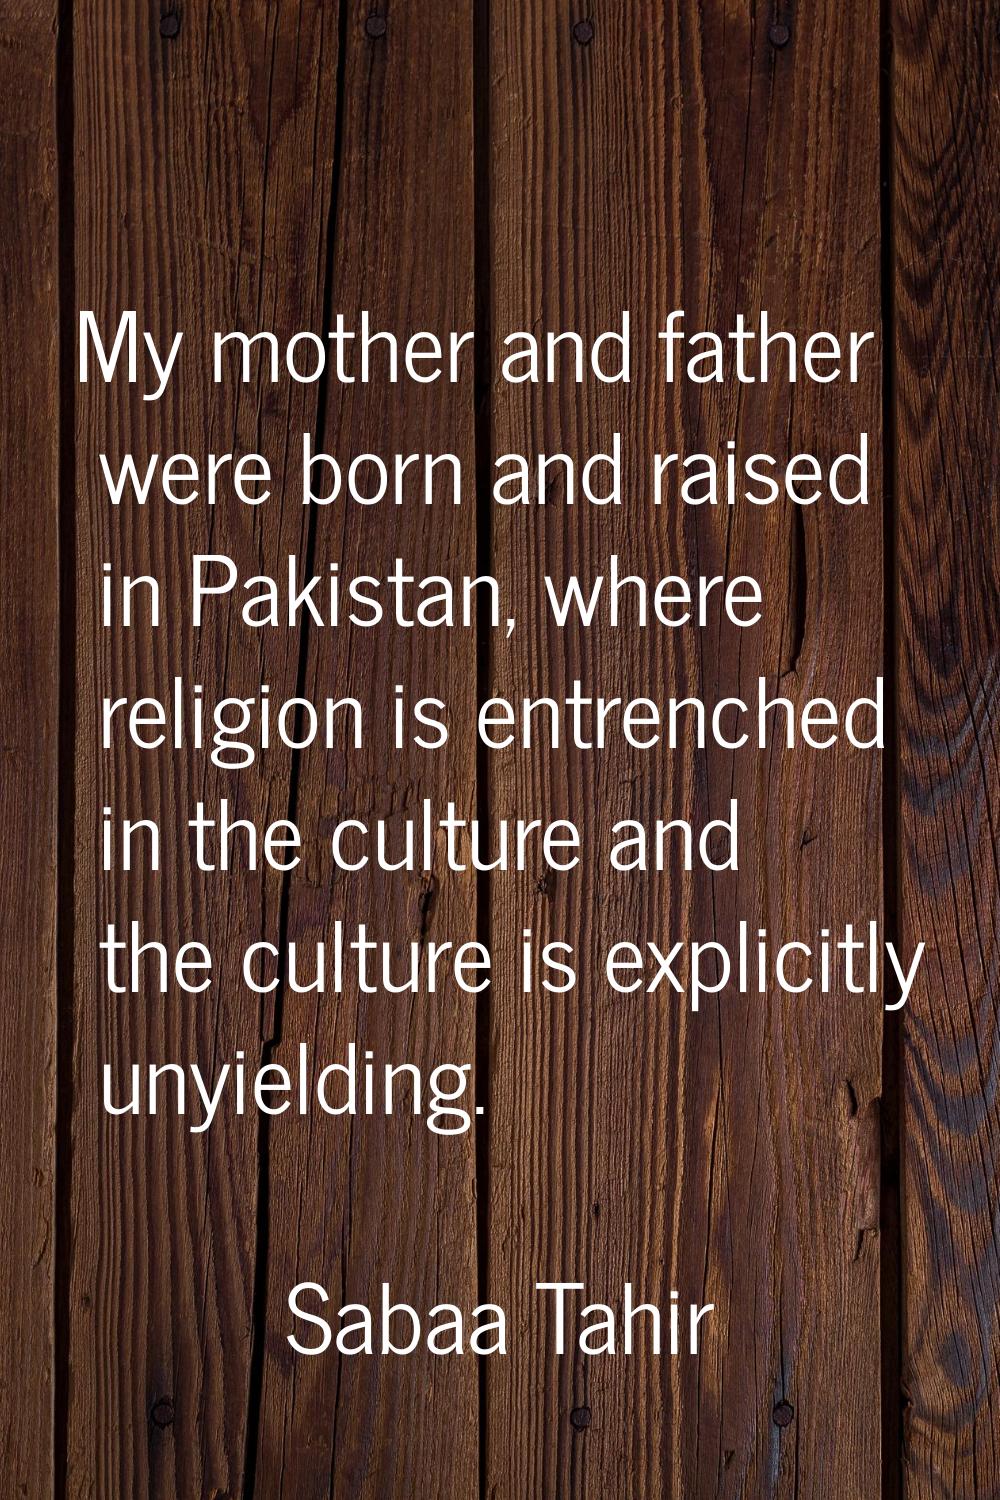 My mother and father were born and raised in Pakistan, where religion is entrenched in the culture 